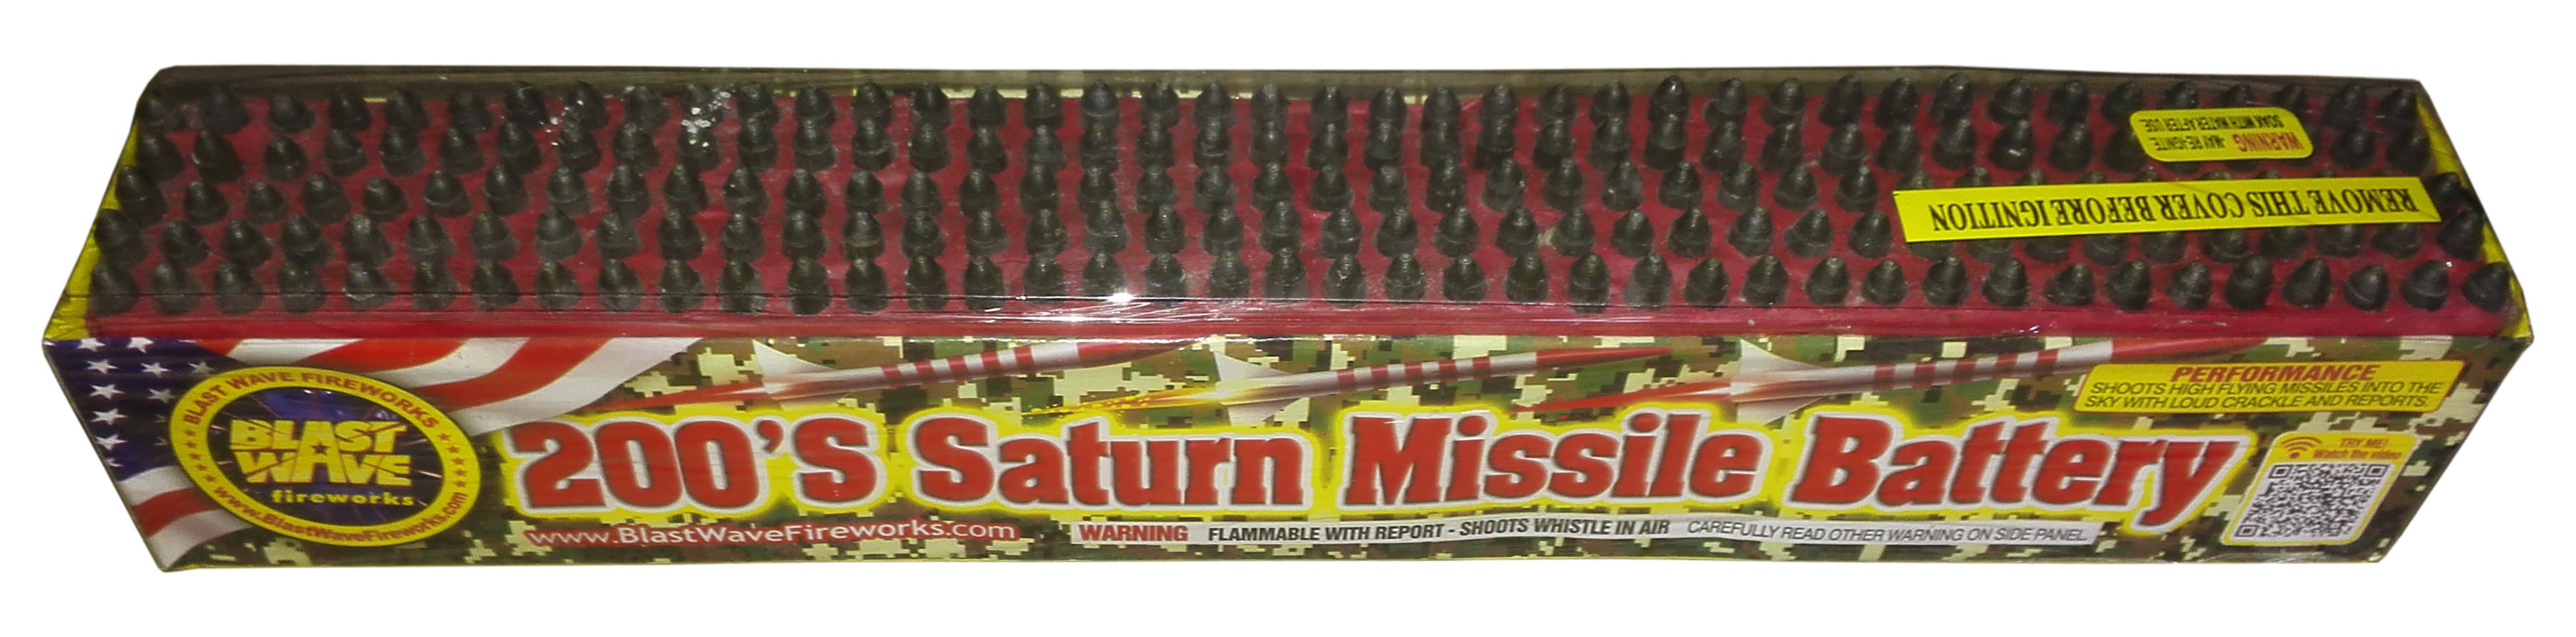 200'S Saturn Missile Battery